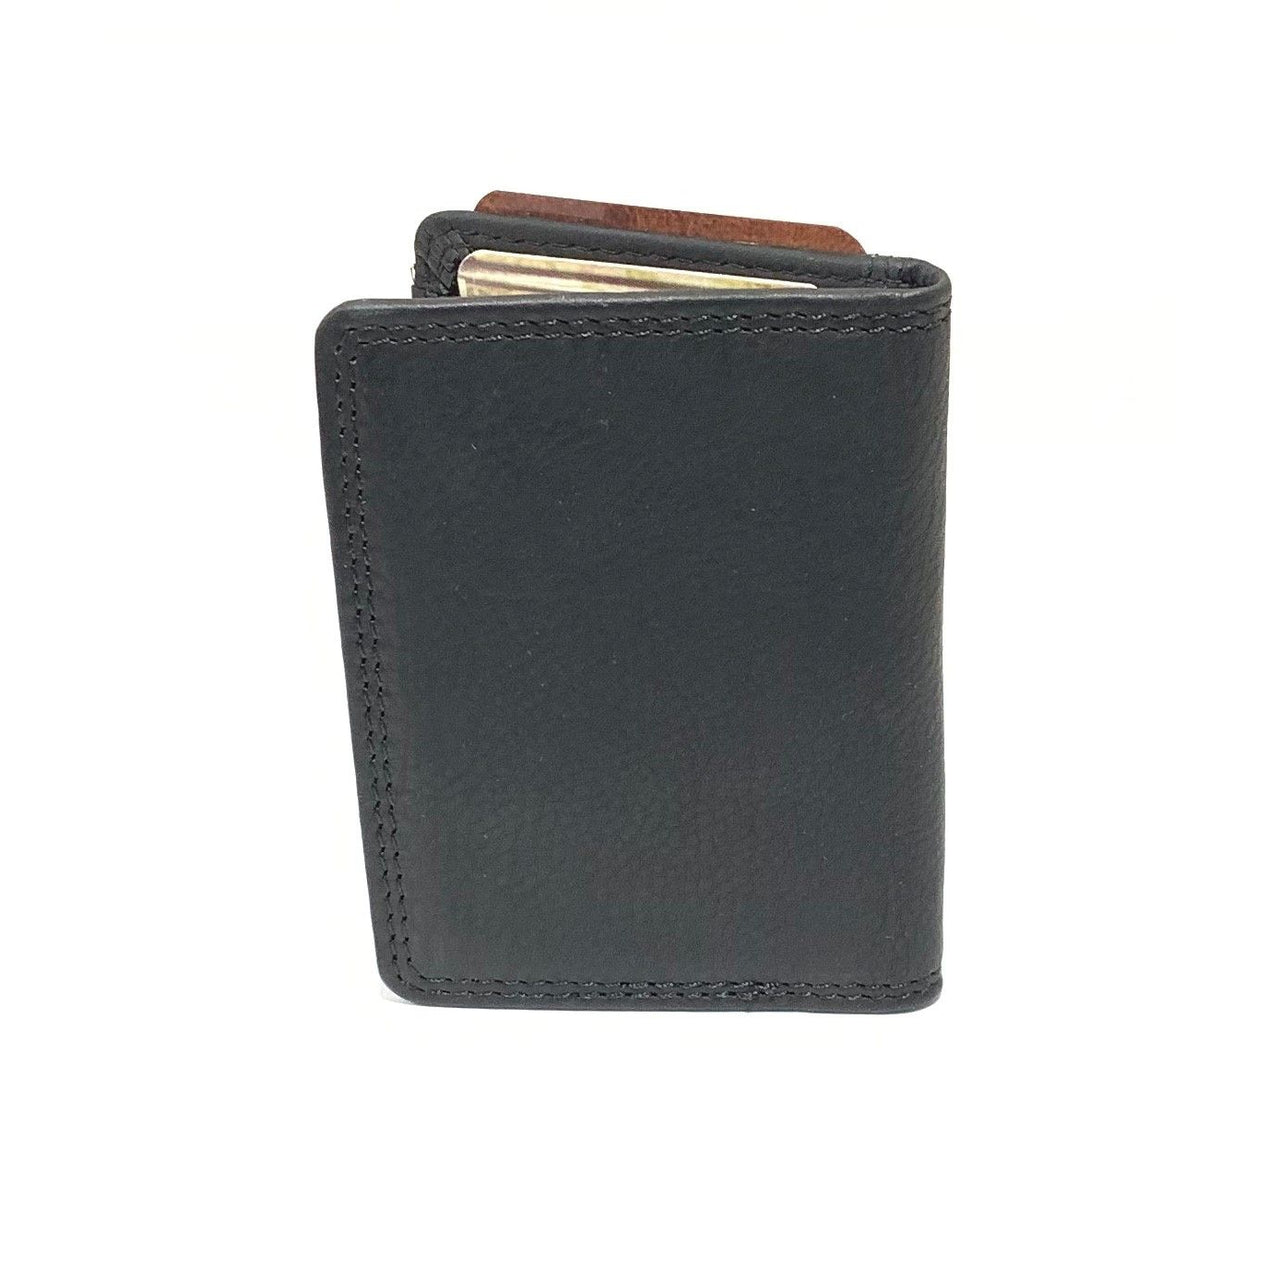 Rugged Earth Leather Card Holder Wallet